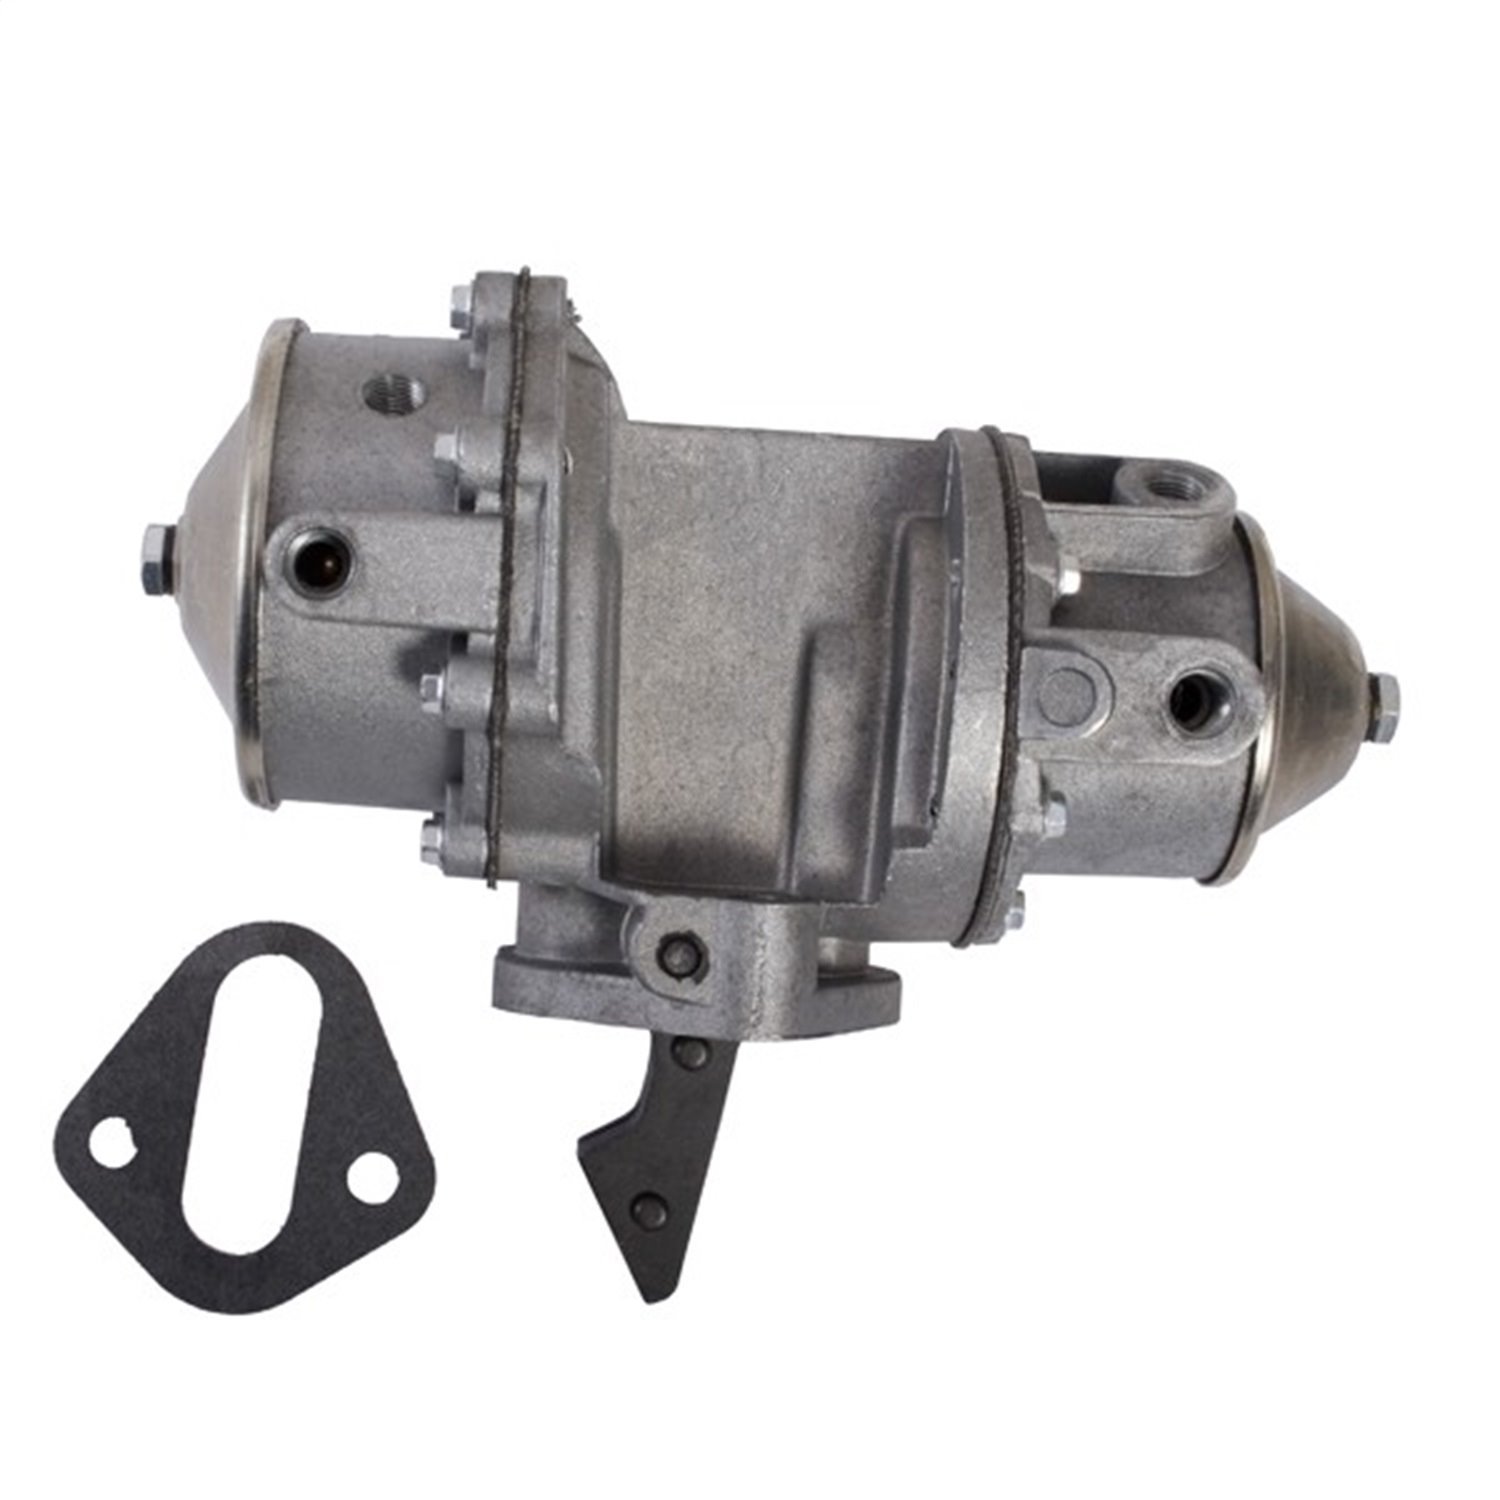 Fuel Pump 134 CI With Vacuum Operated Wipers Dual Action Without Glass Fuel Bowl 46-49 Truck 46-49 S